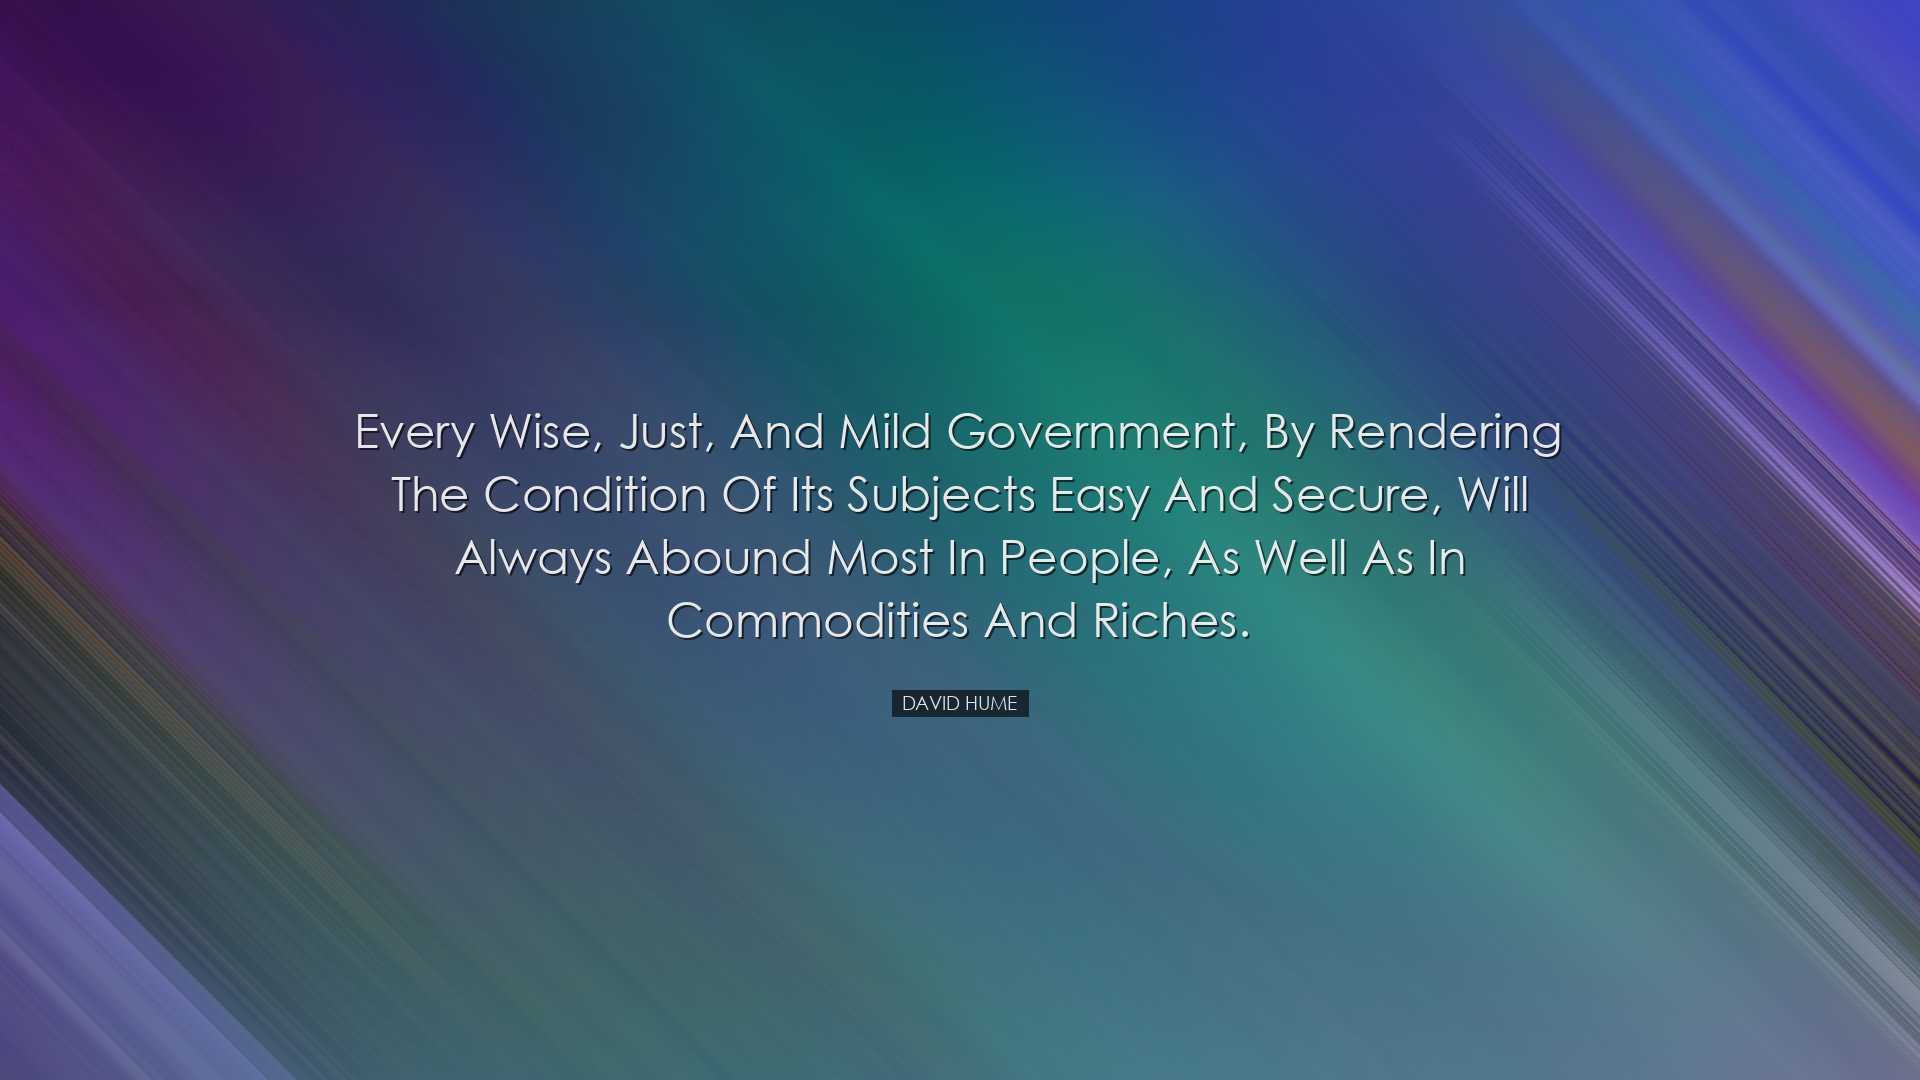 Every wise, just, and mild government, by rendering the condition